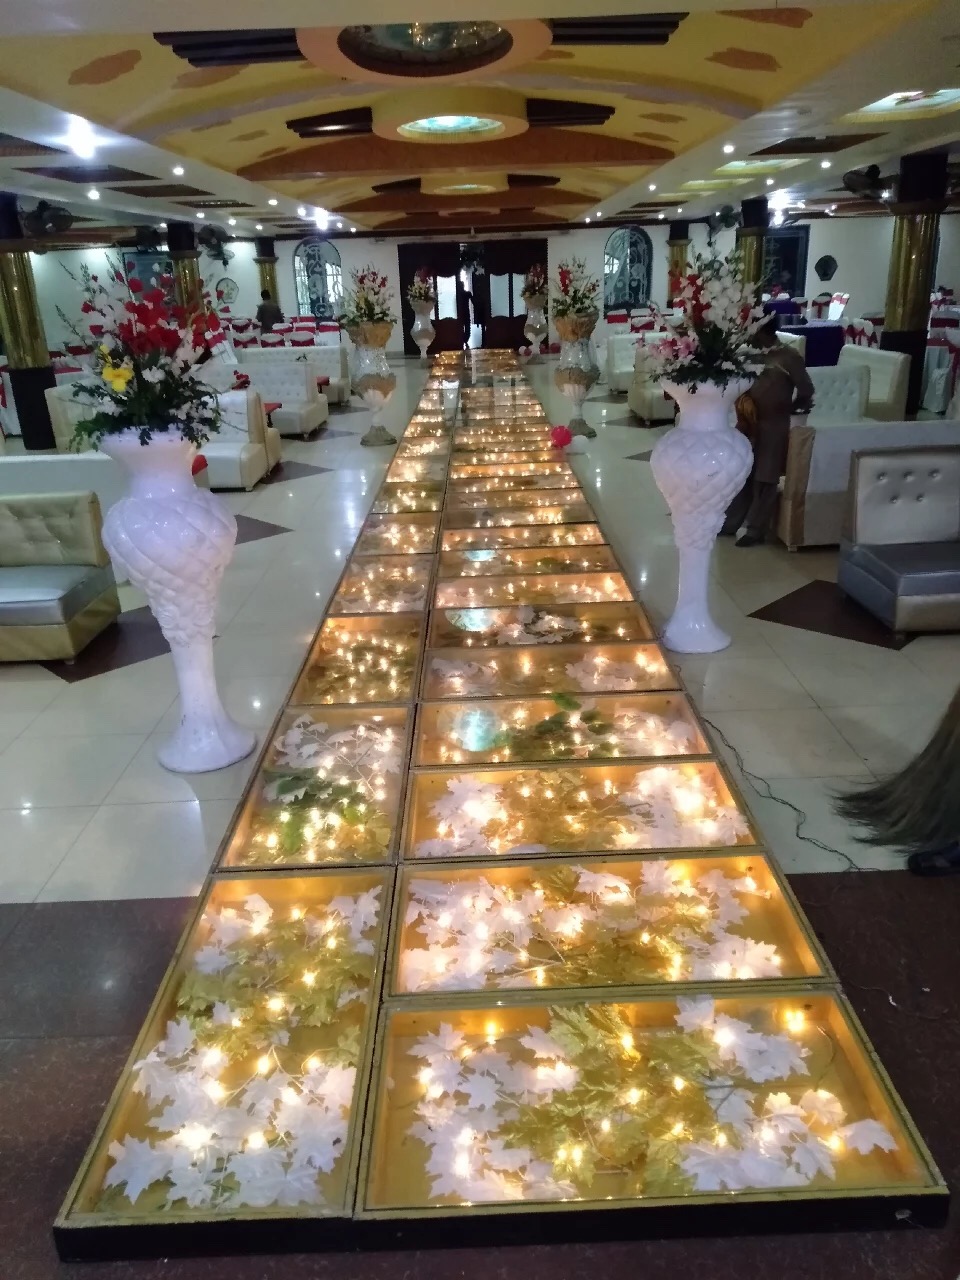 Royal Venue Banquet Hall & Caterers